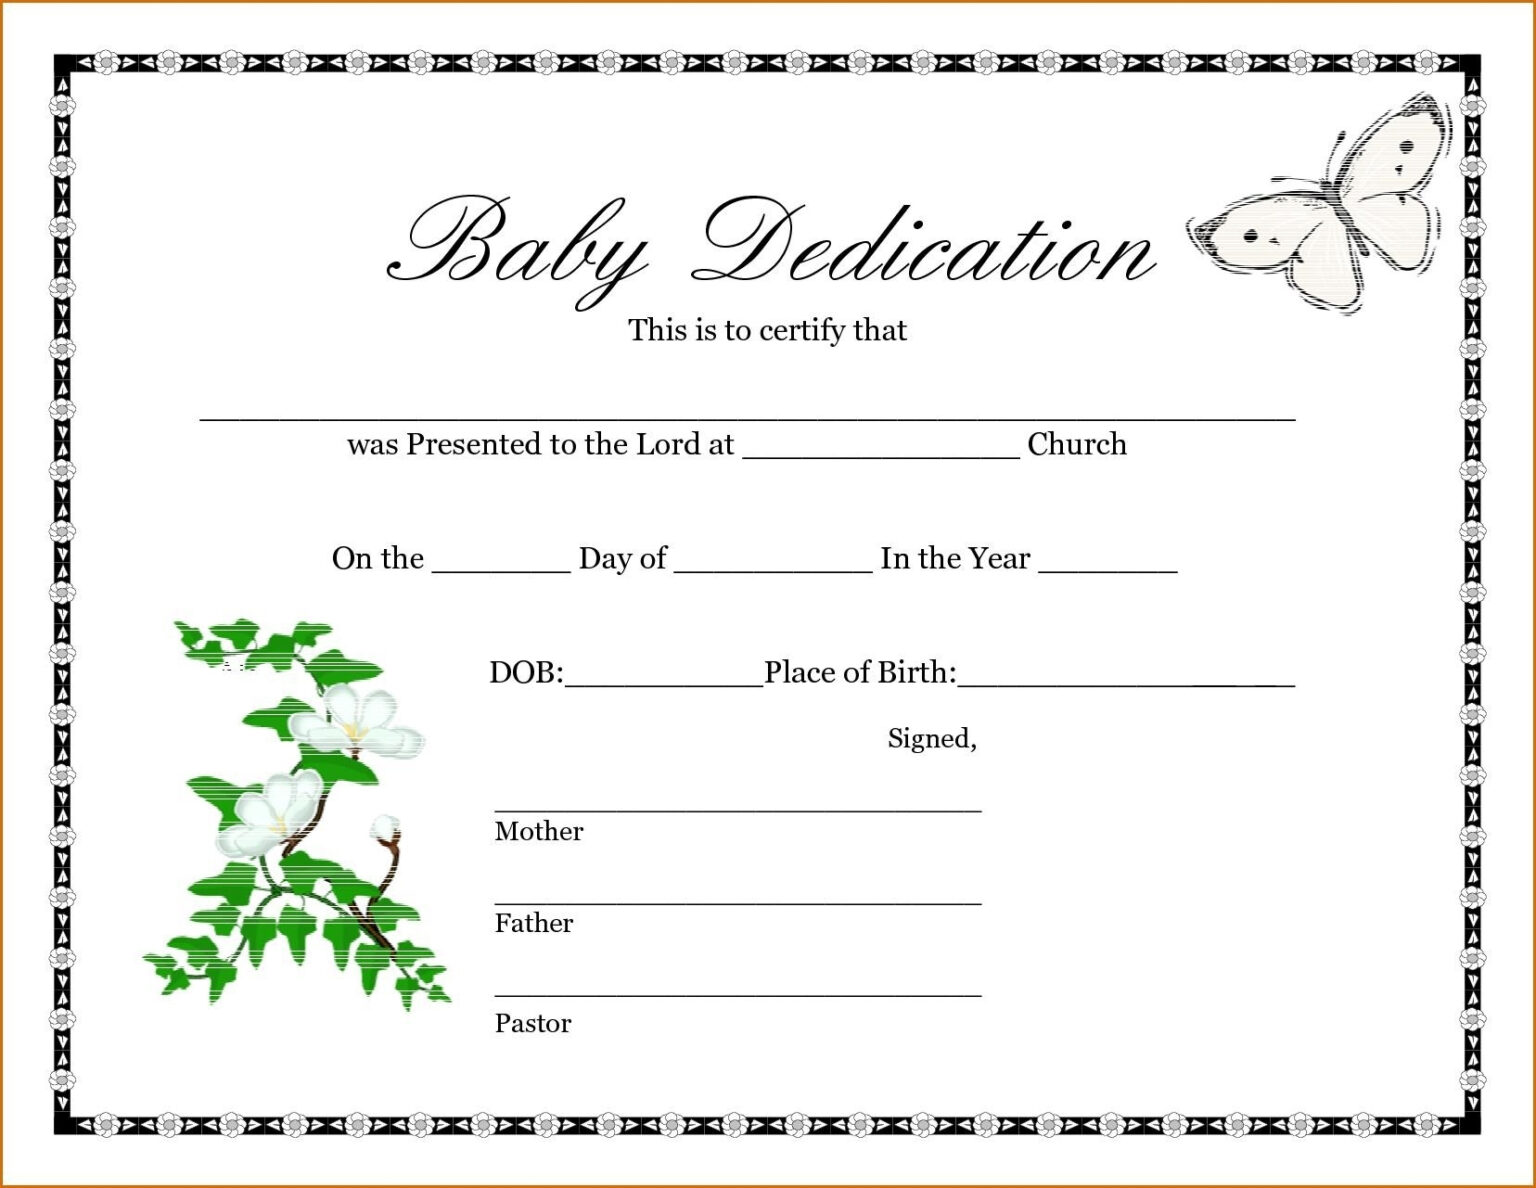 a-birth-certificate-template-safebest-xyz-in-build-a-bear-birth